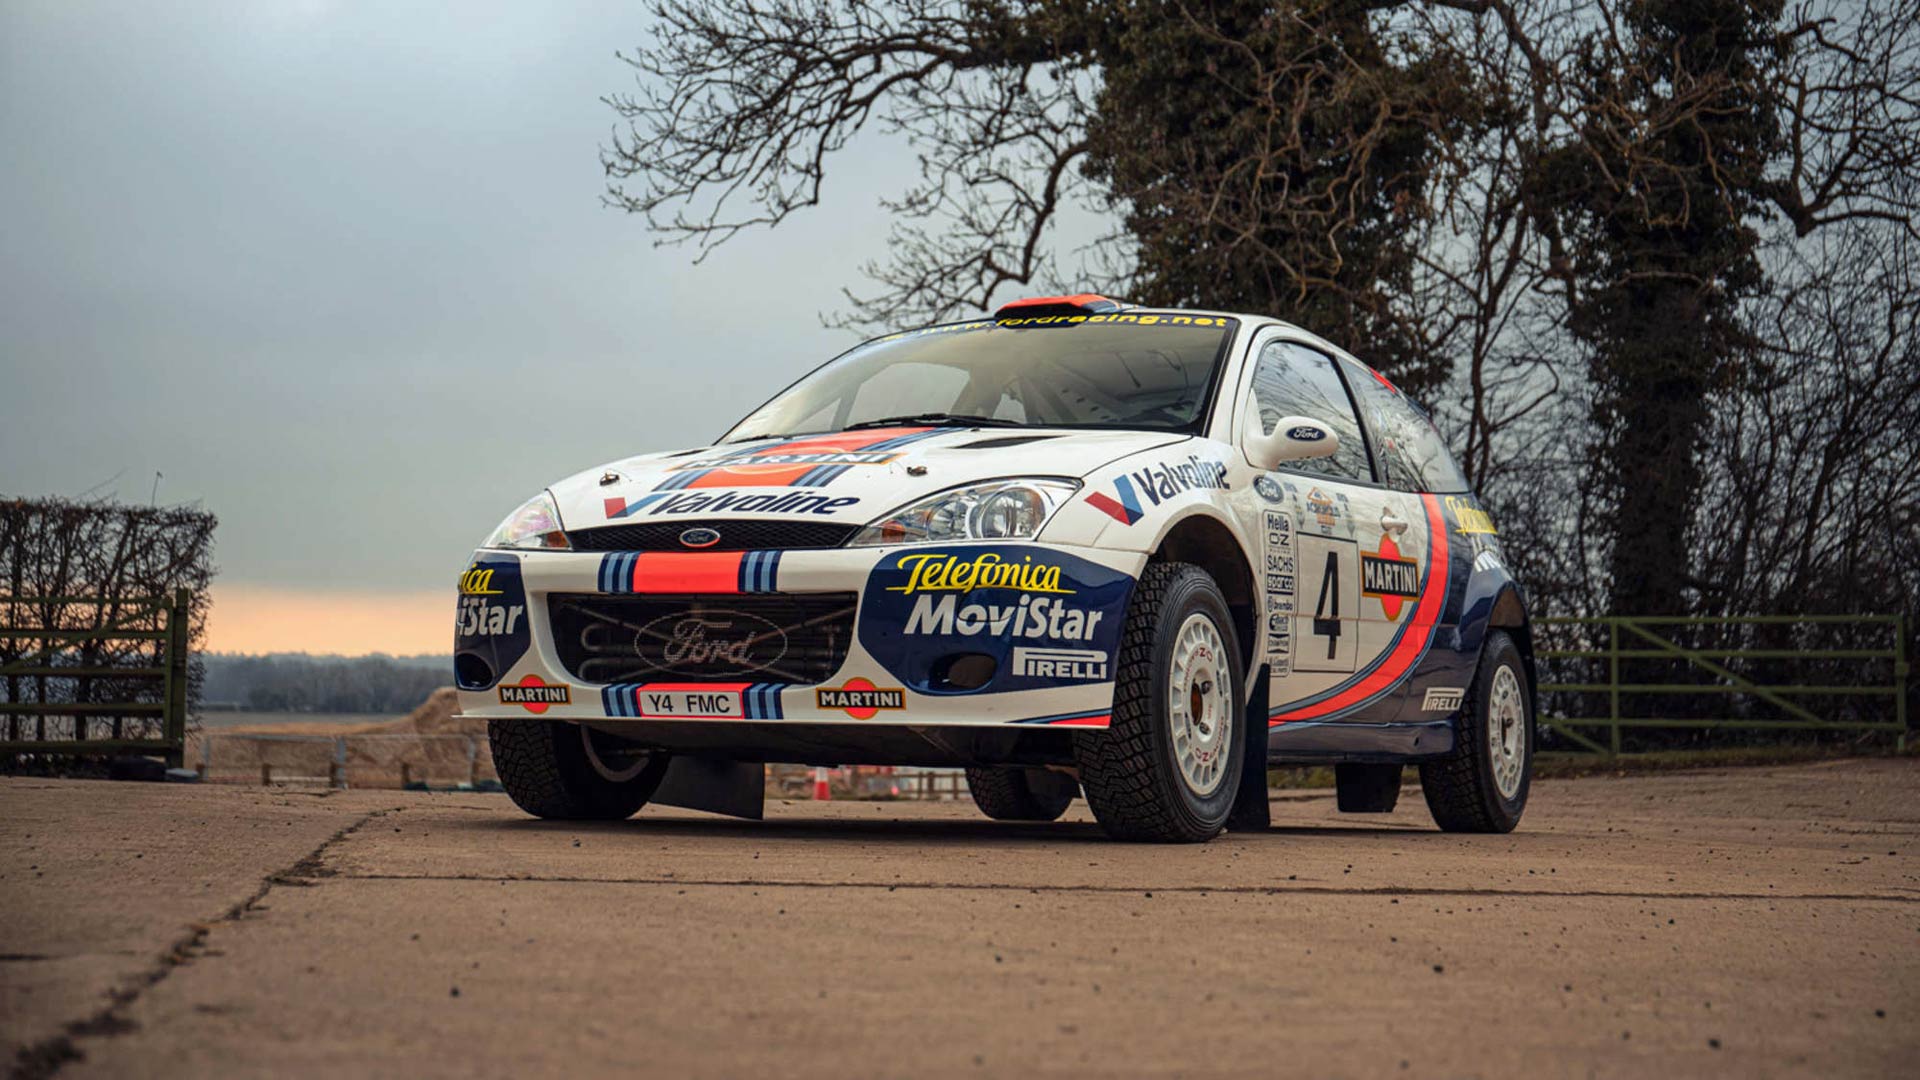 Ex-Colin McRae Ford Focus WRC heads to auction